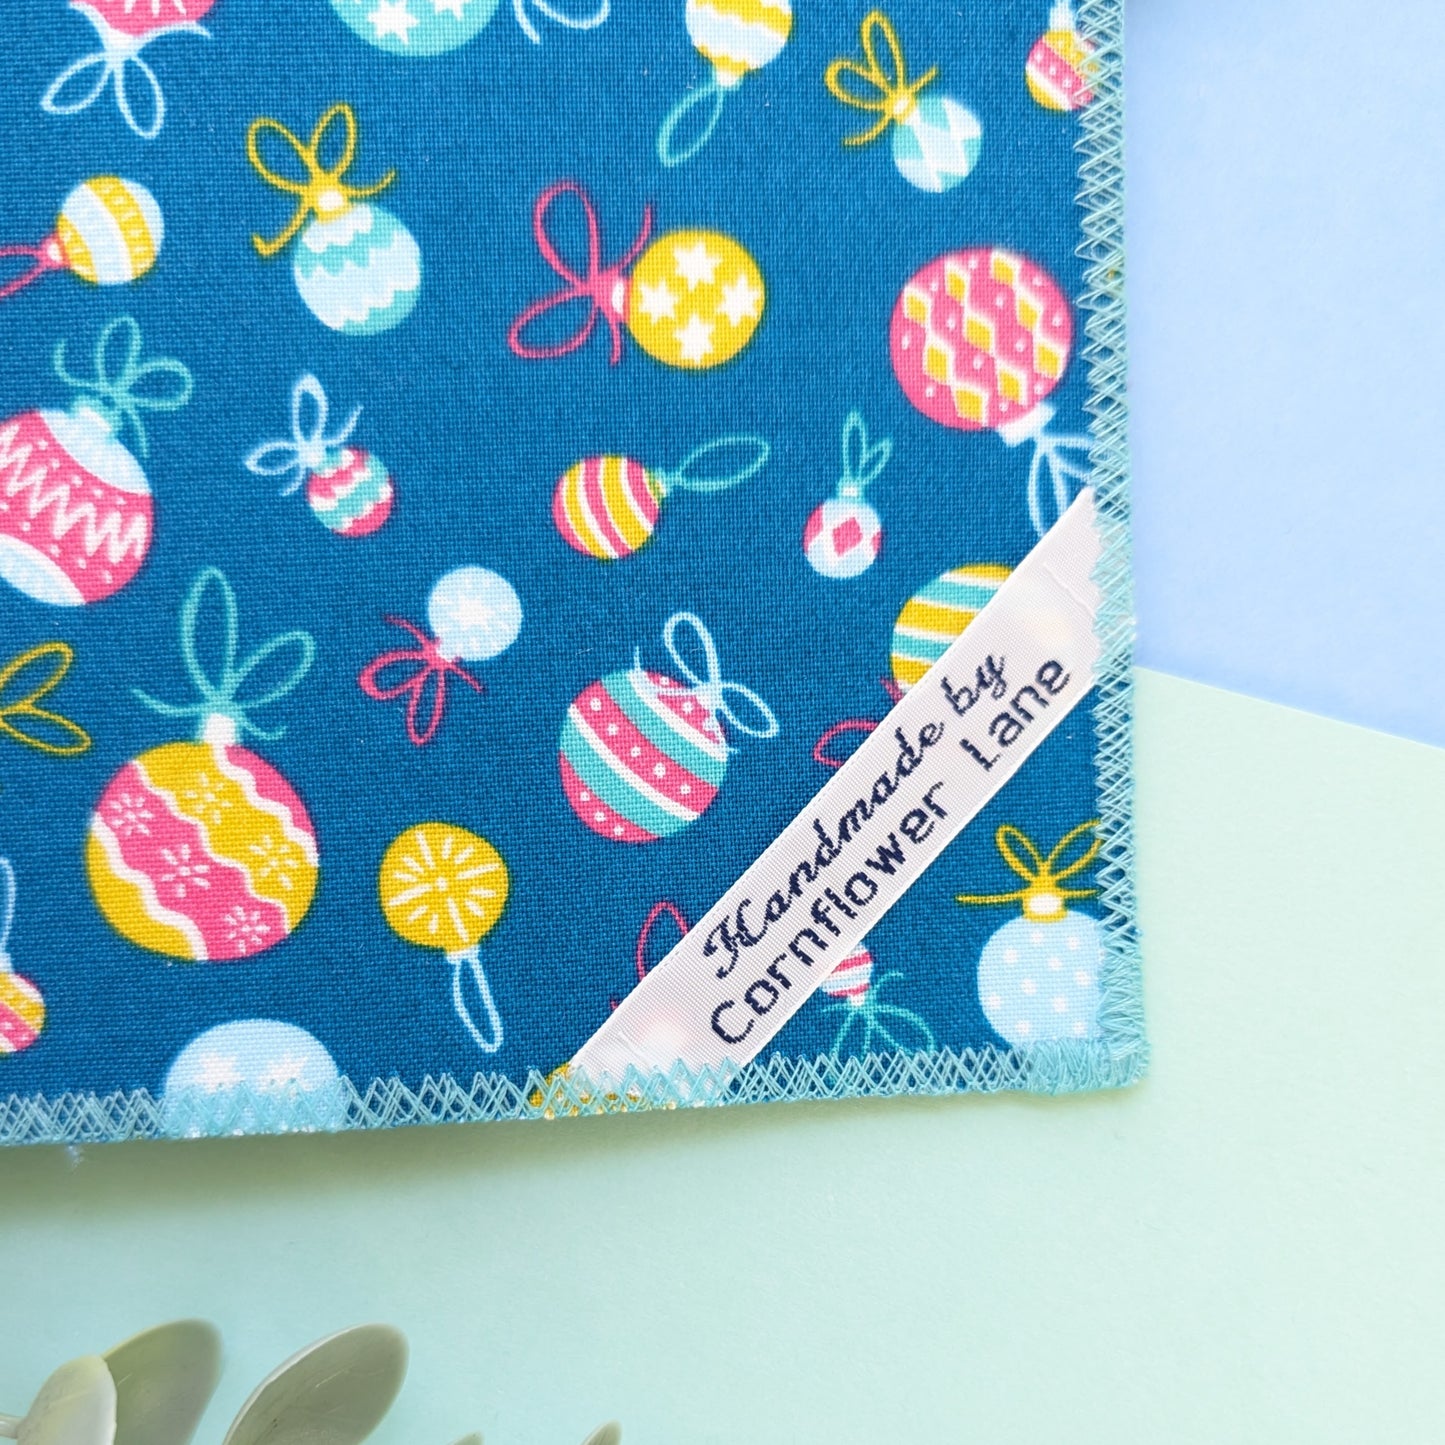 Handmade Liberty Festive Baubles Fabric Cover Journal - Turquoise